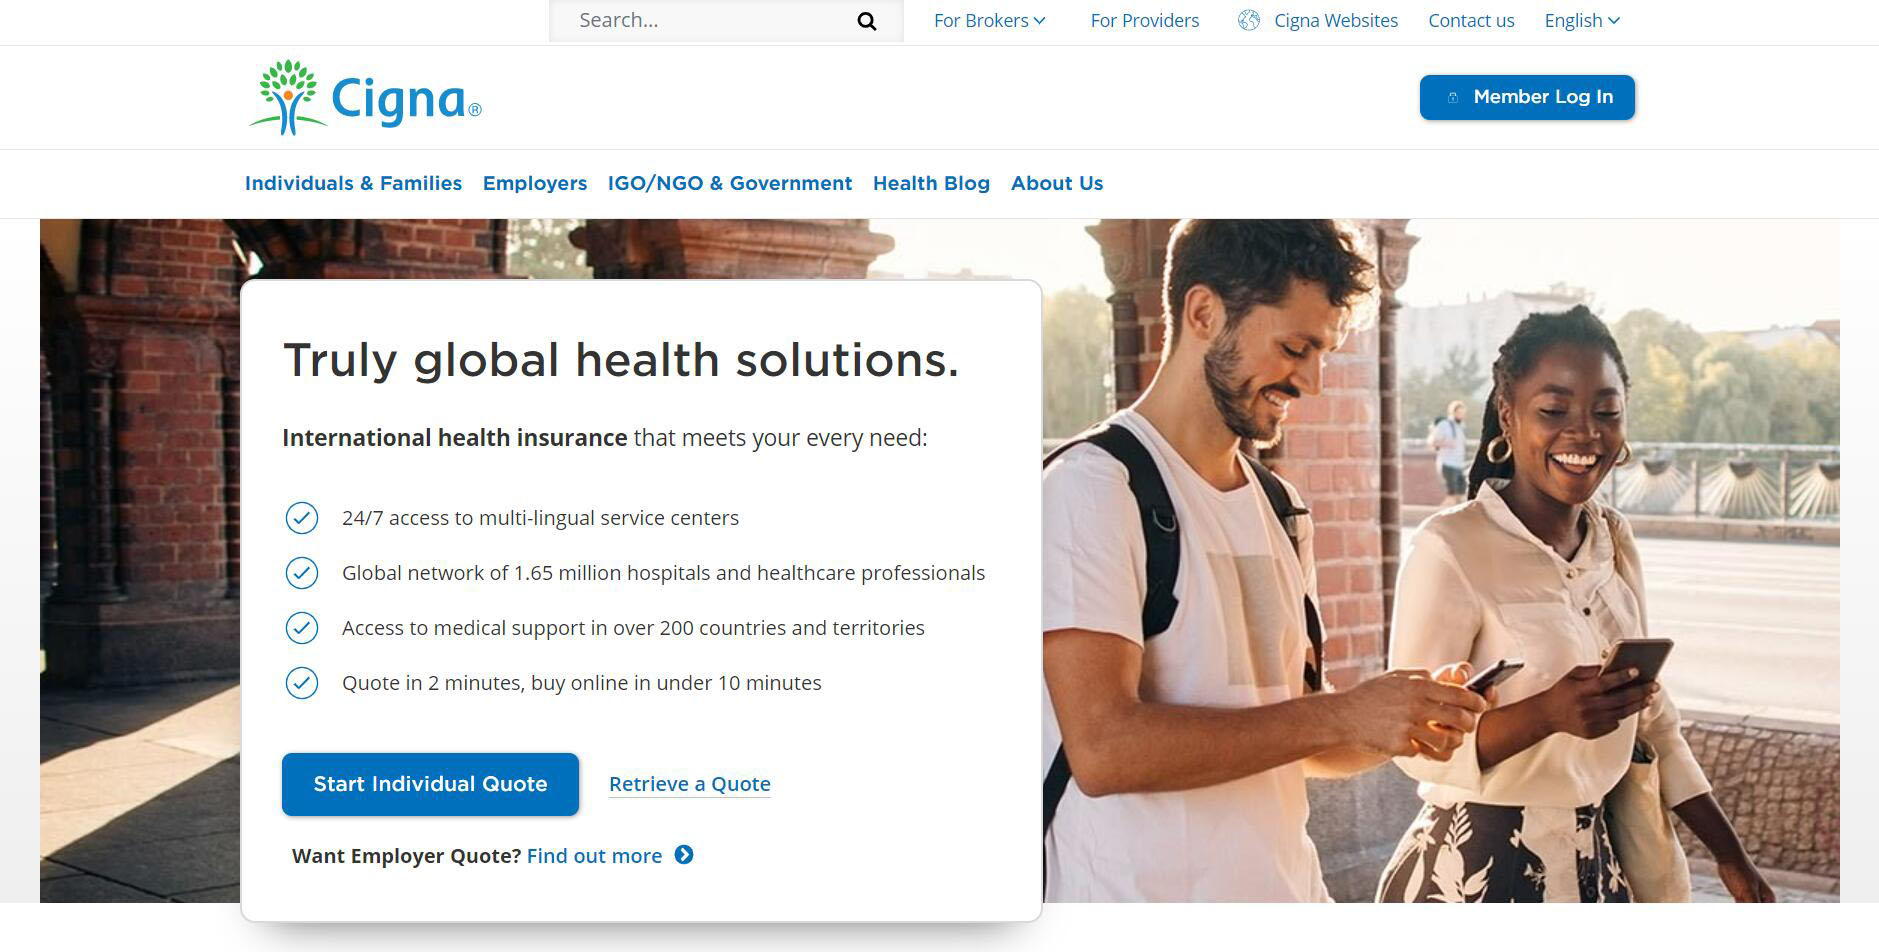 New offer launched: Cigna Affiliate Program